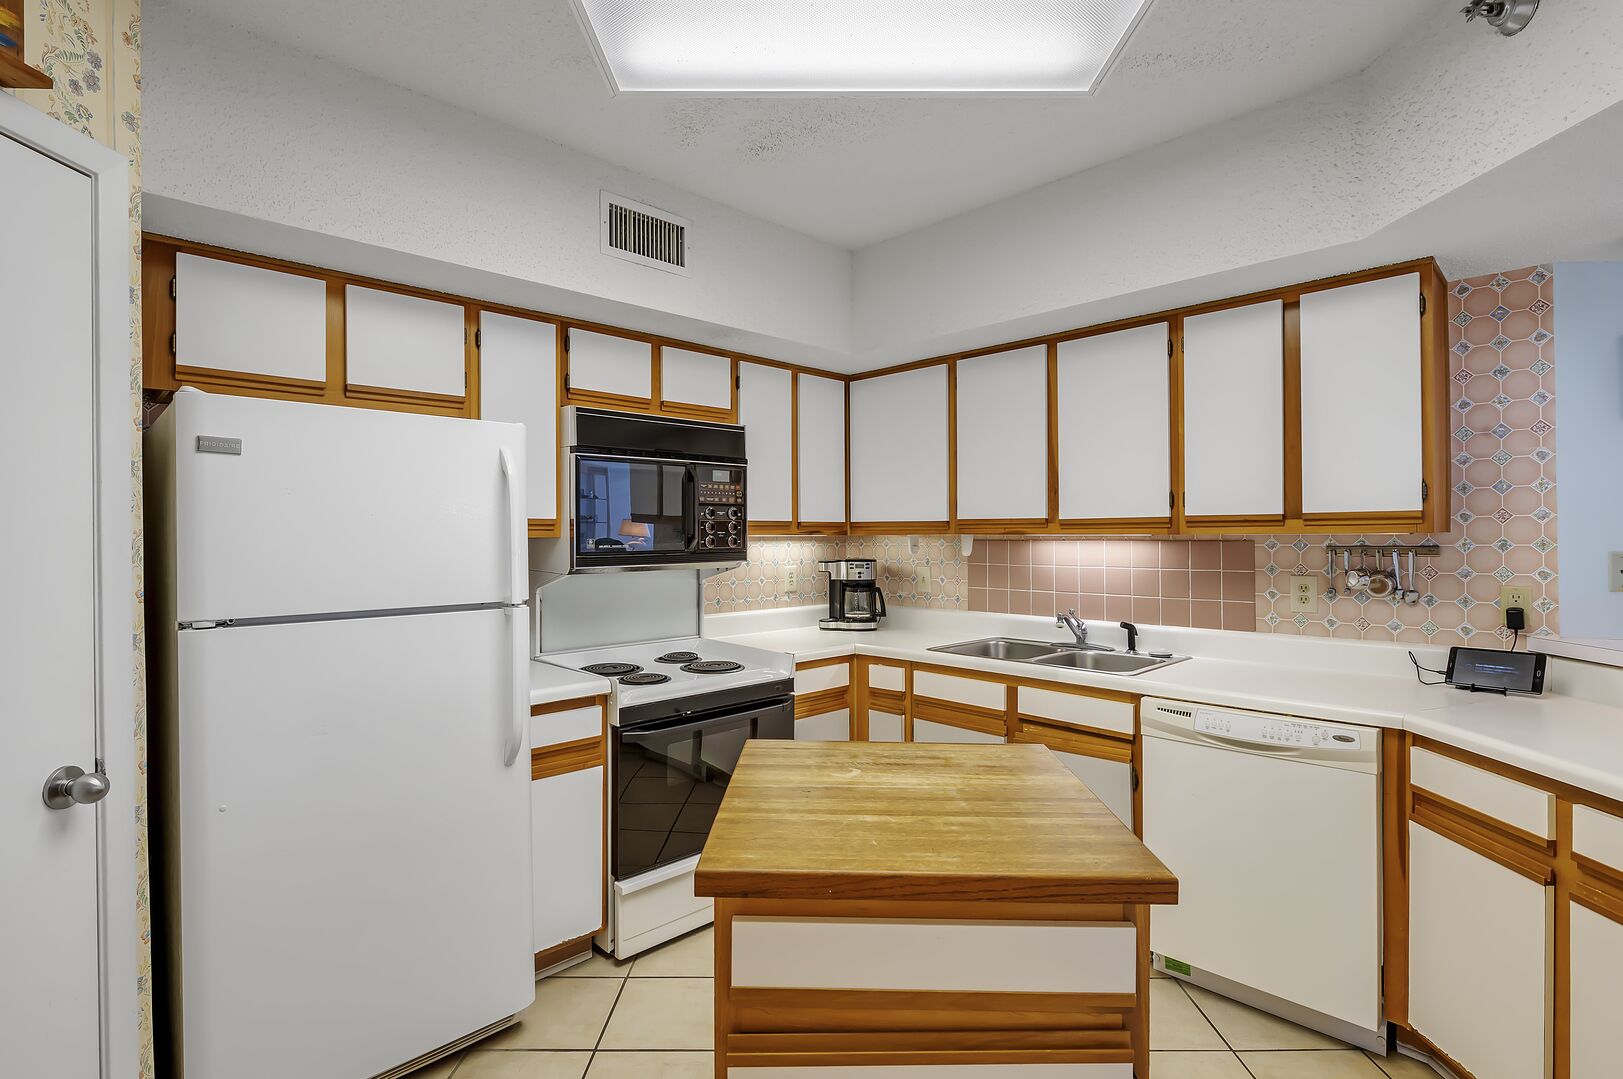 Fully Equipped Kitchen with a Breakfast Bar